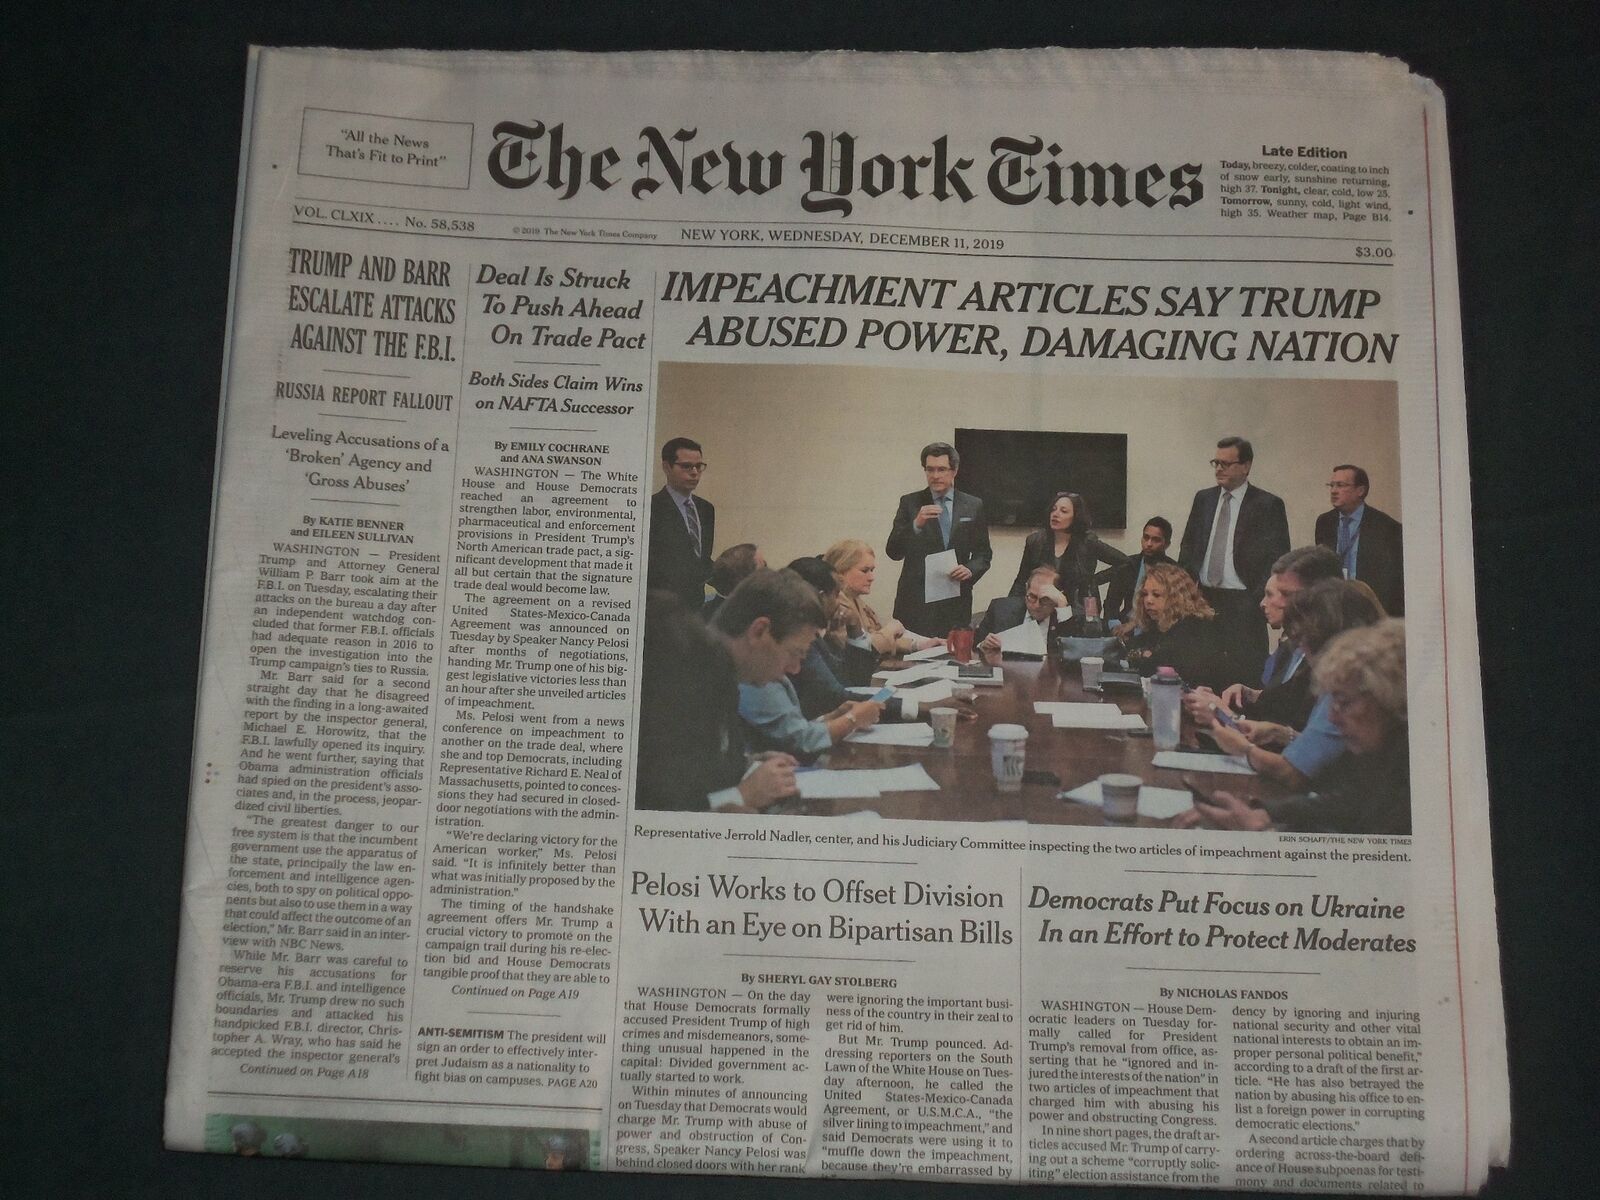 2019 DECEMBER 11 NEW YORK TIMES - IMPEACHMENT ARTICLES SAY TRUMP ABUSED POWER